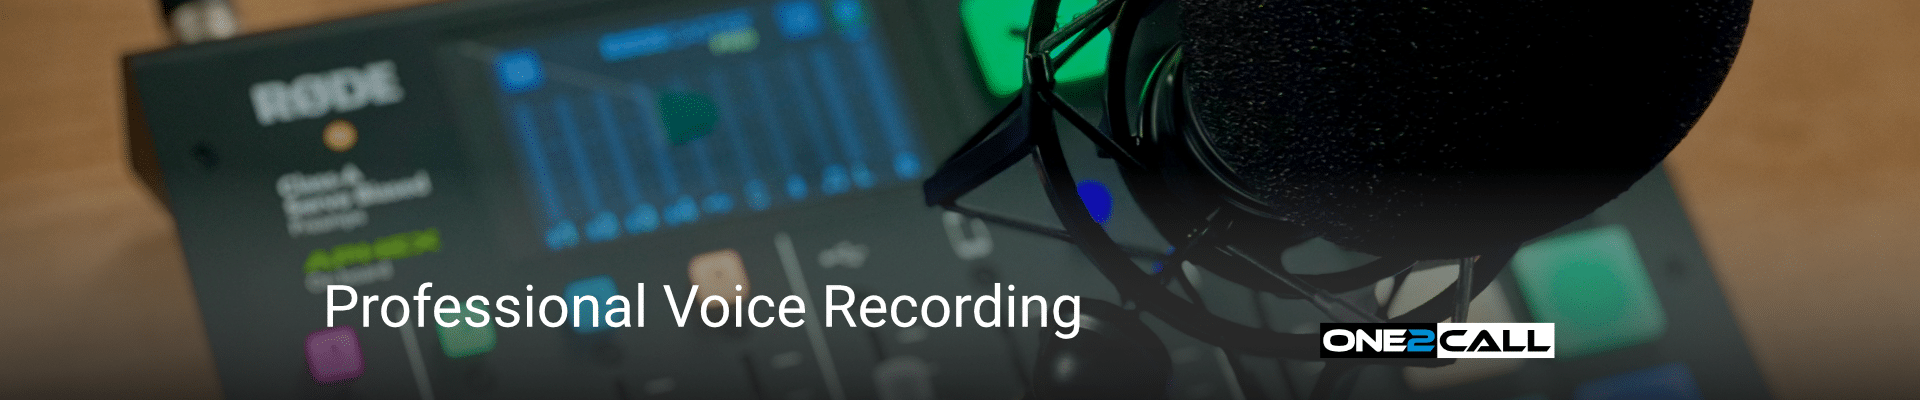 Professional Phone System Voice Recording